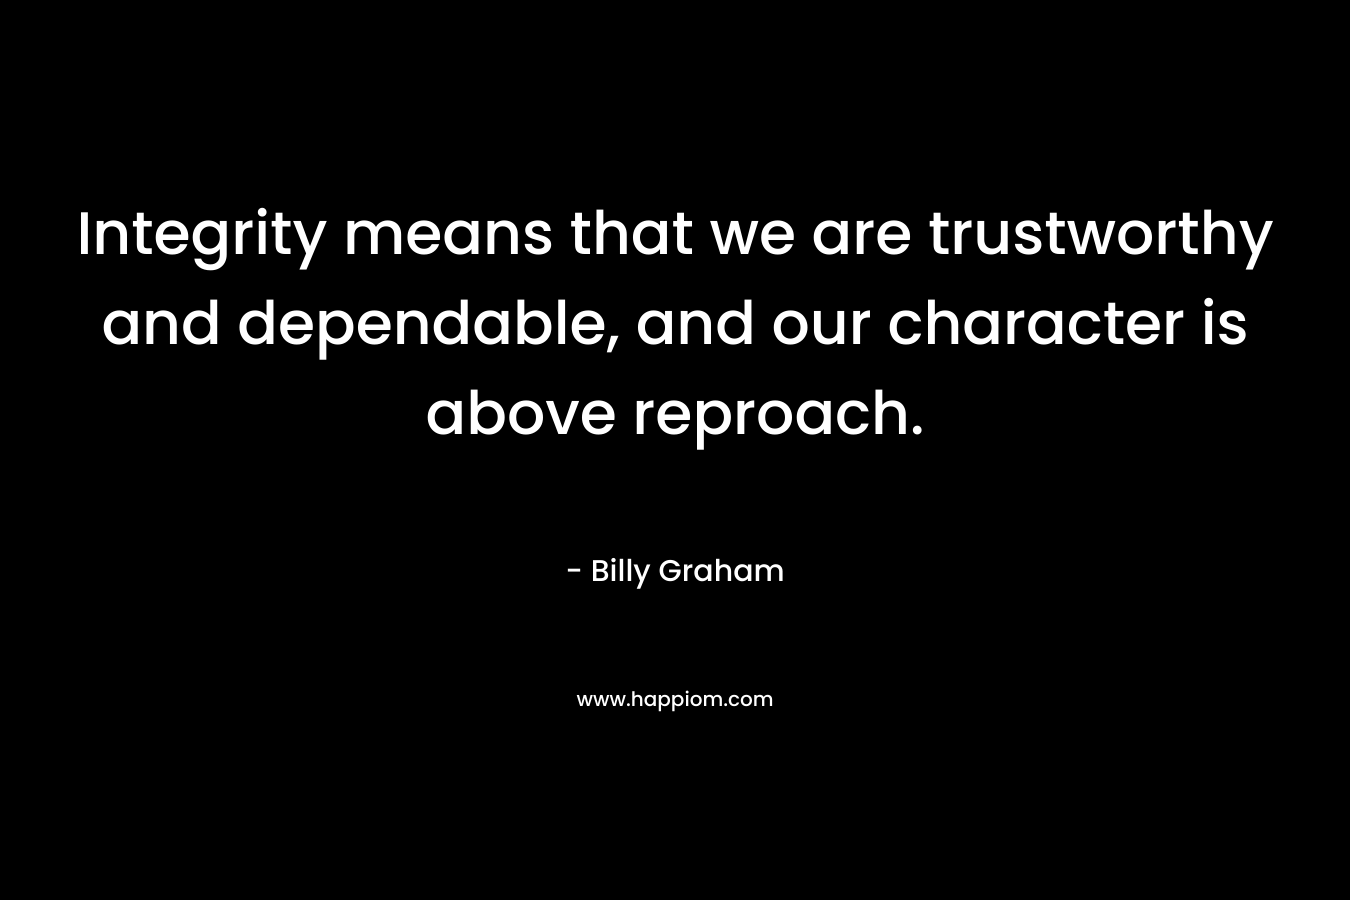 Integrity means that we are trustworthy and dependable, and our character is above reproach.